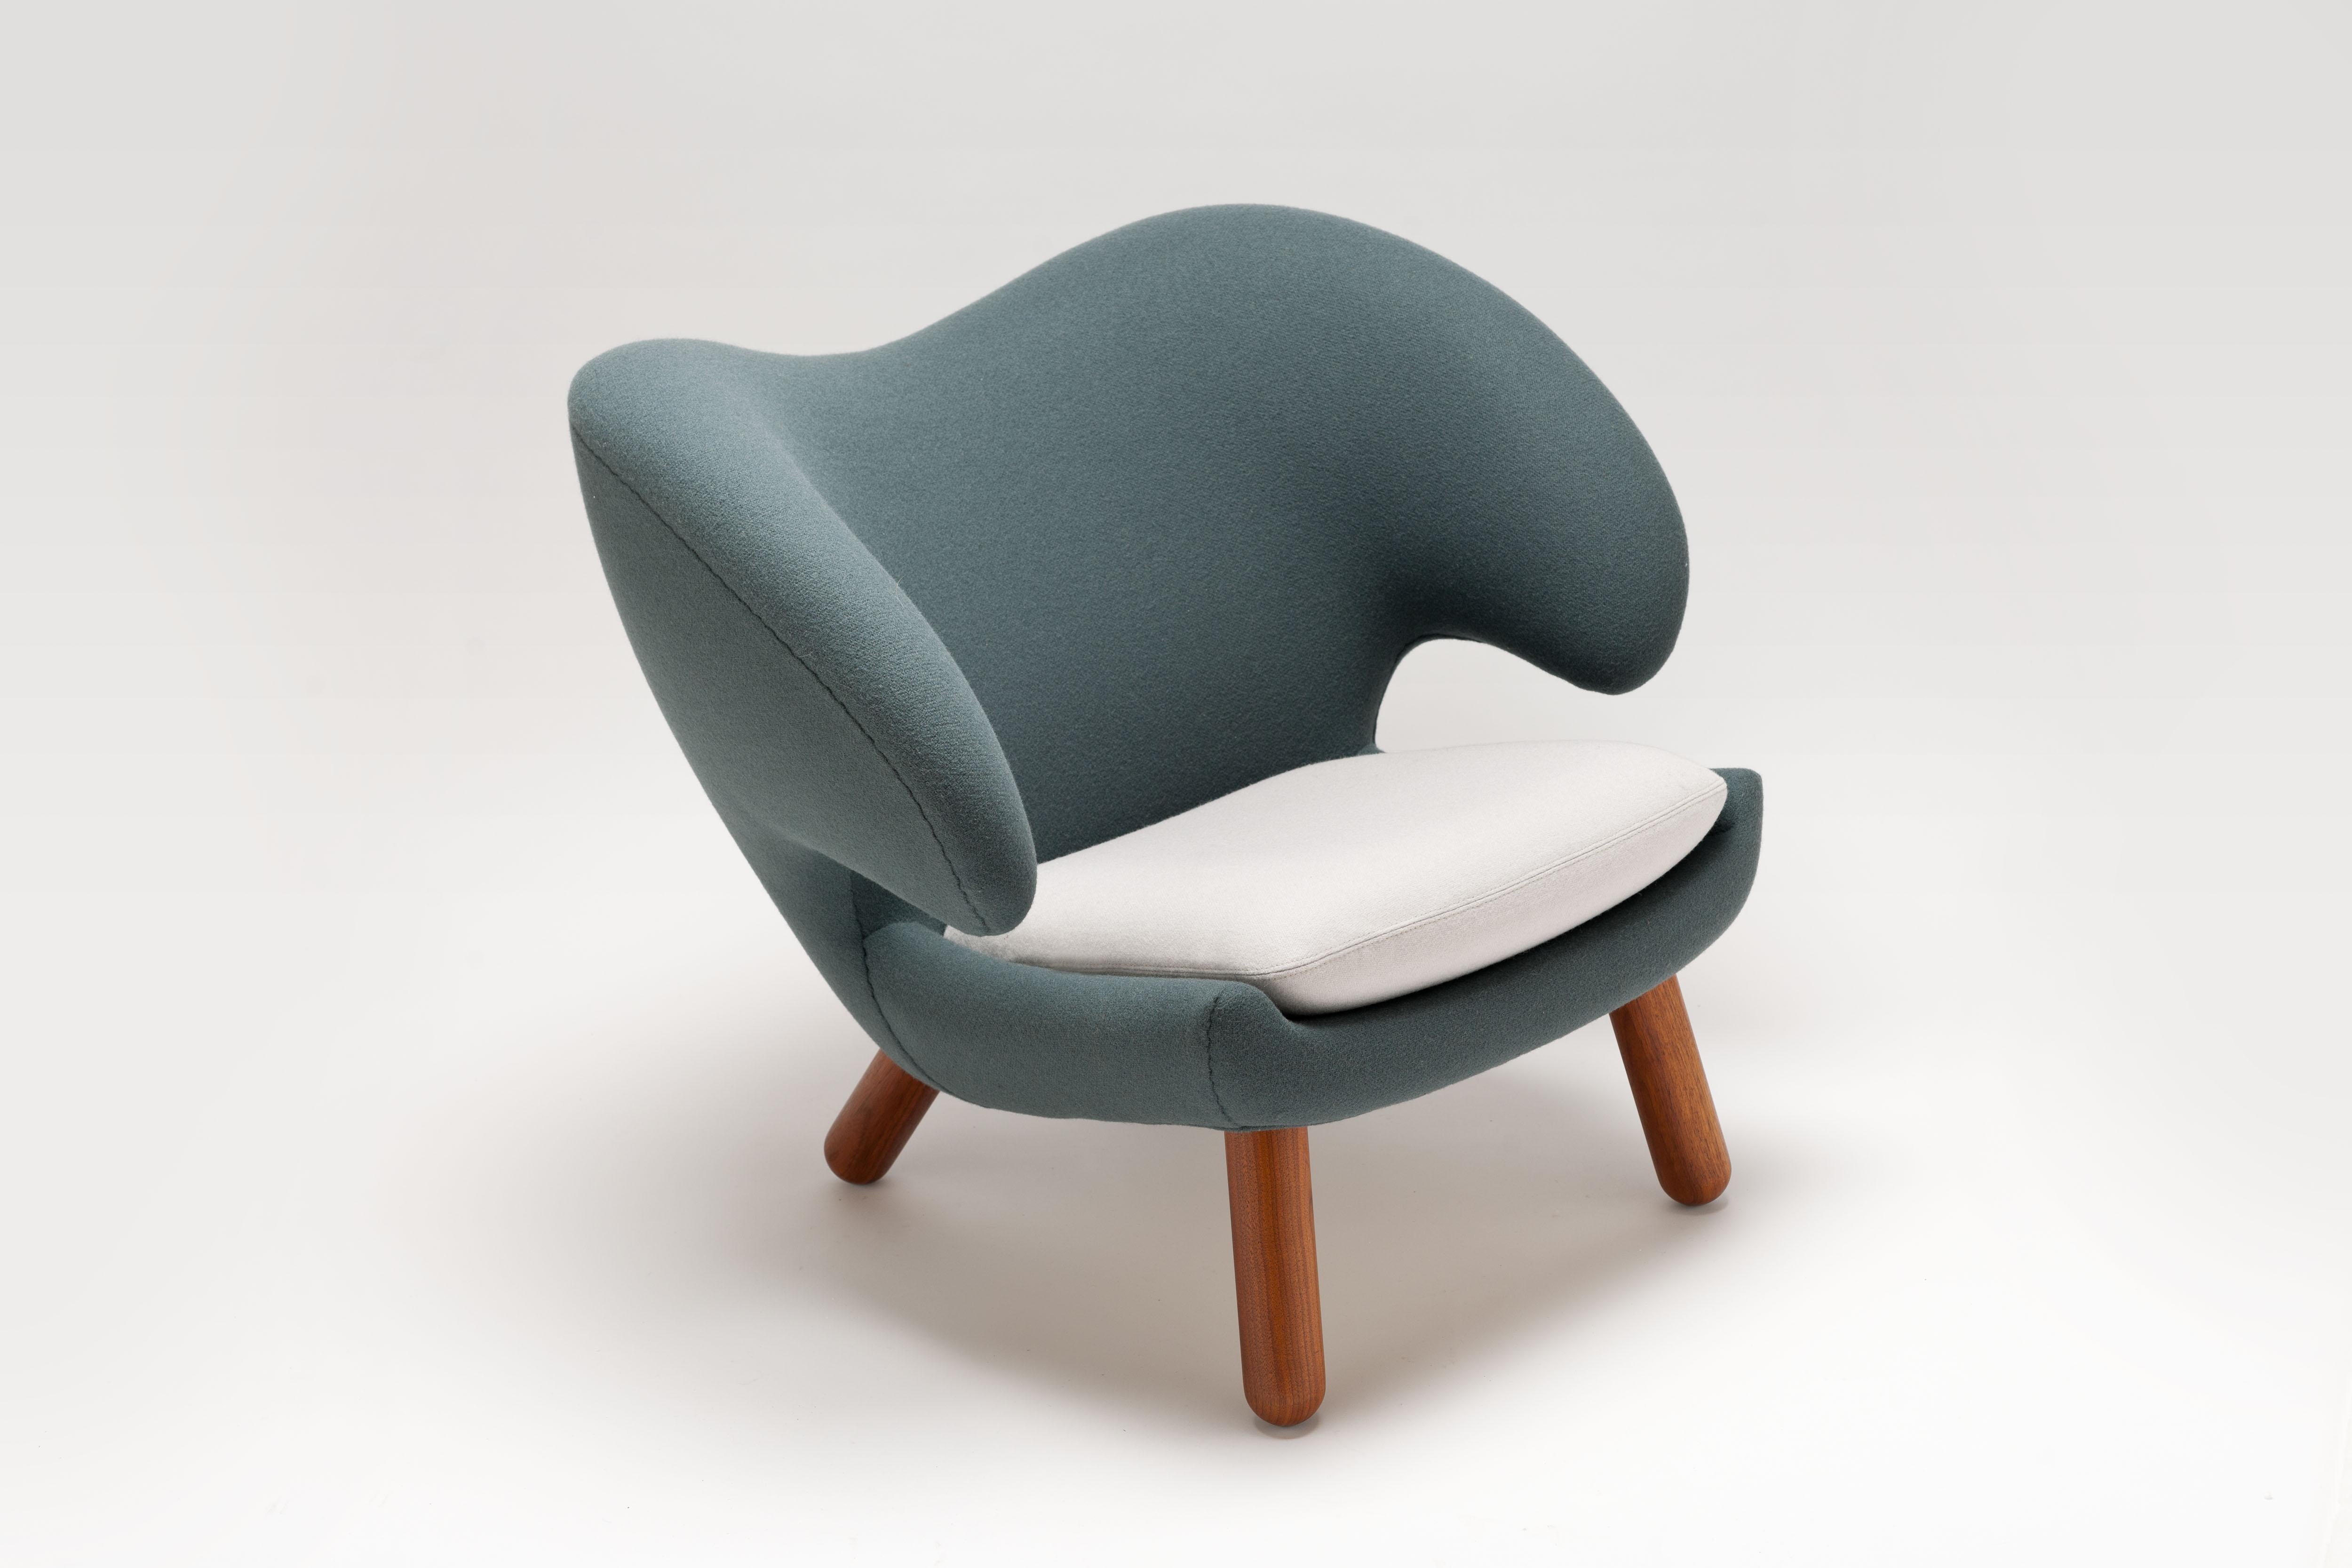 Wool Pelican Chair by Finn Juhl for One Collection